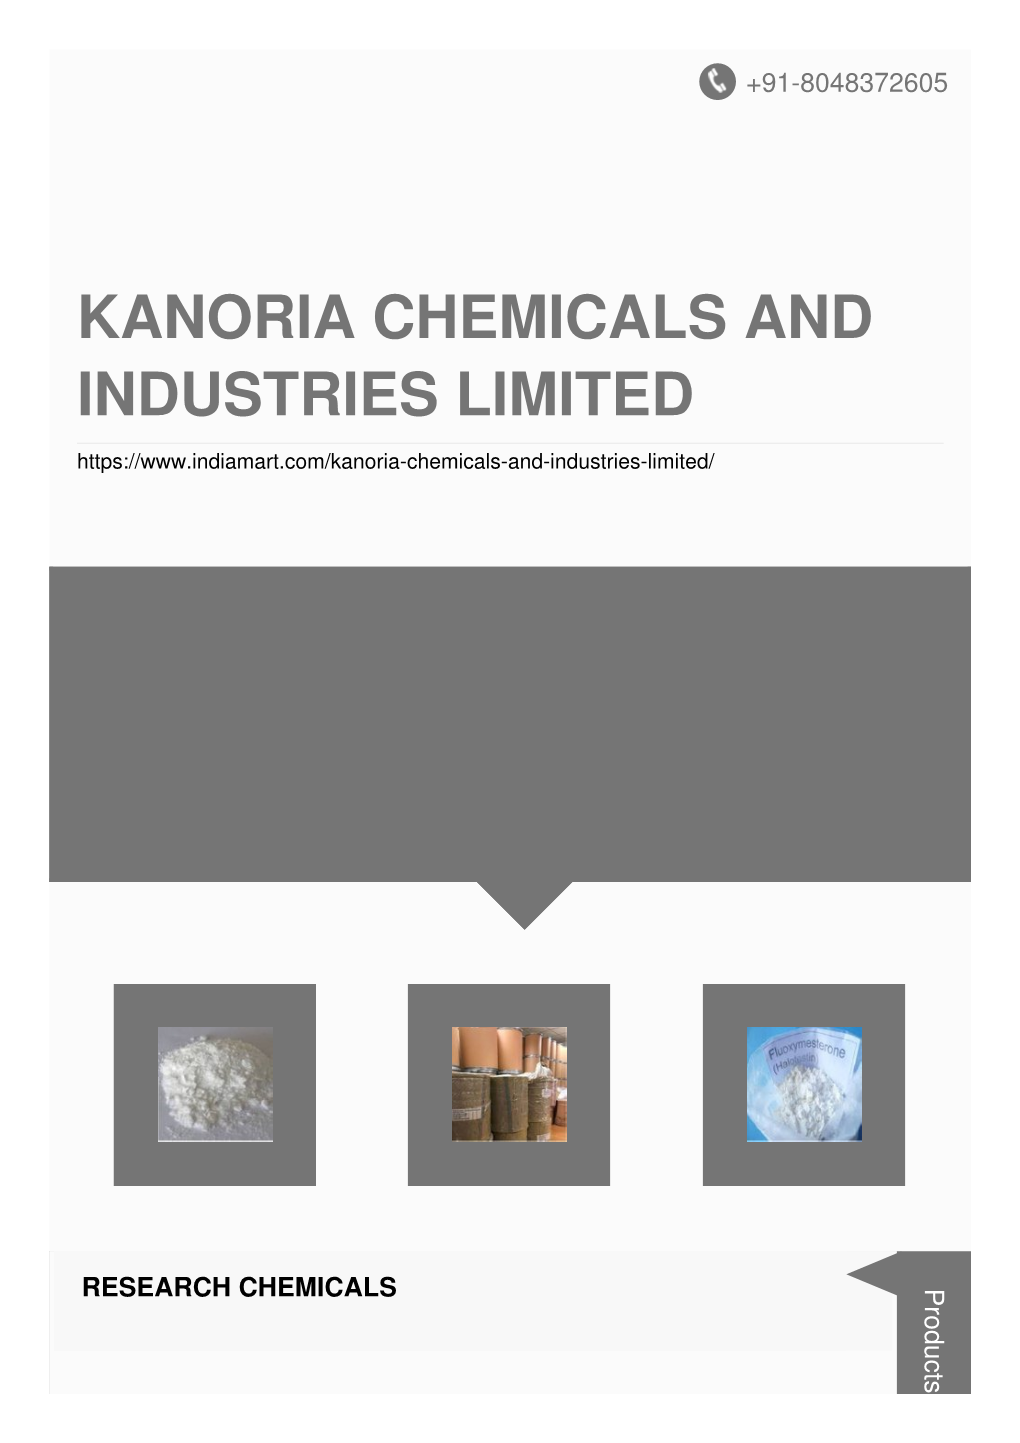 Kanoria Chemicals and Industries Limited